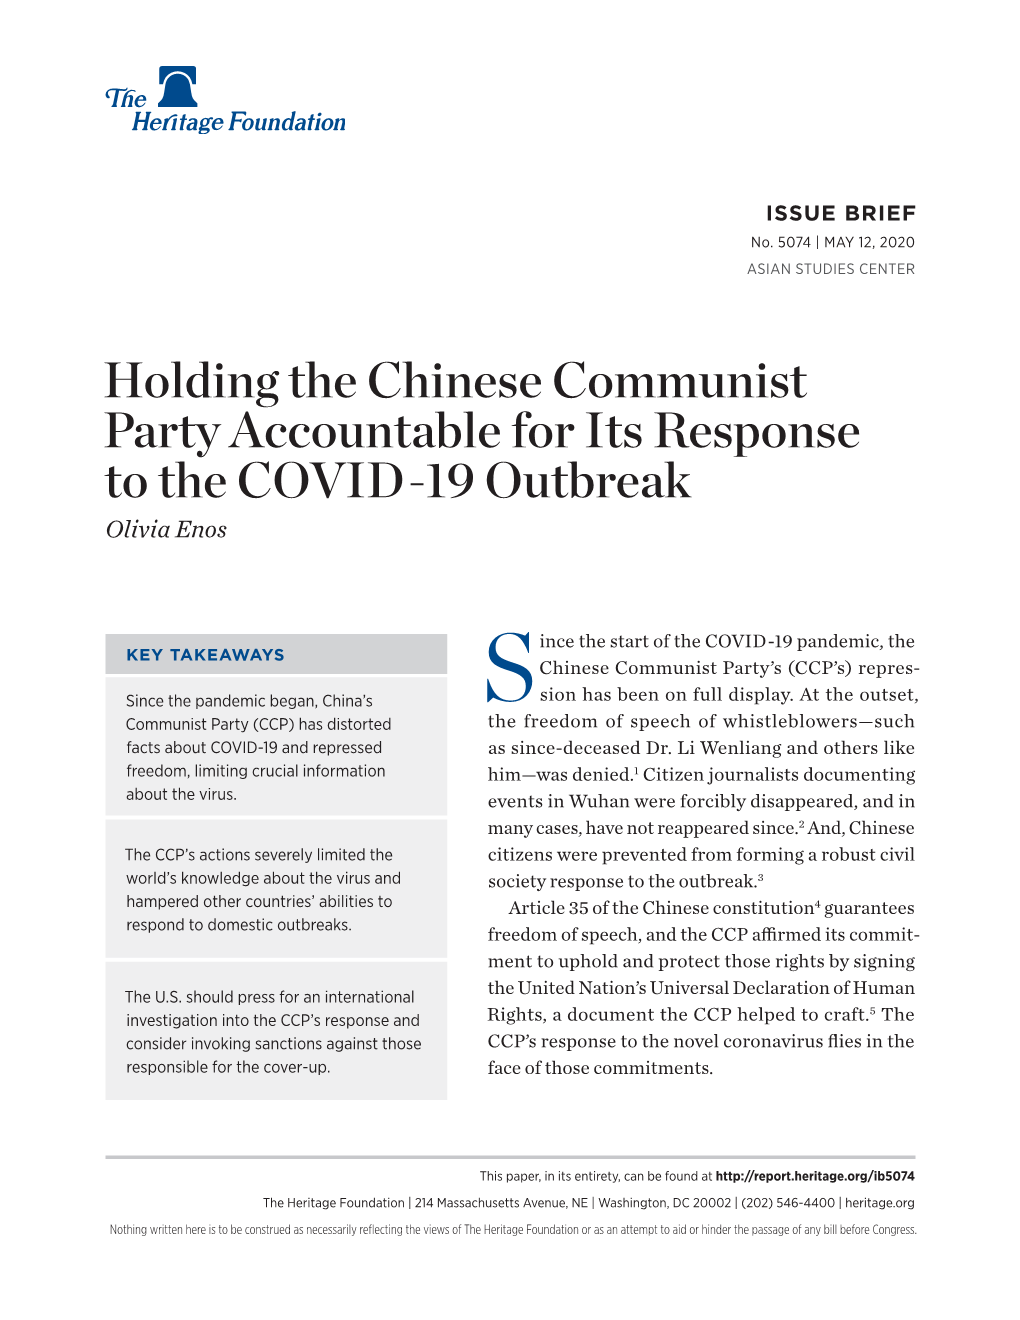 Holding the Chinese Communist Party Accountable for Its Response to the COVID-19 Outbreak Olivia Enos